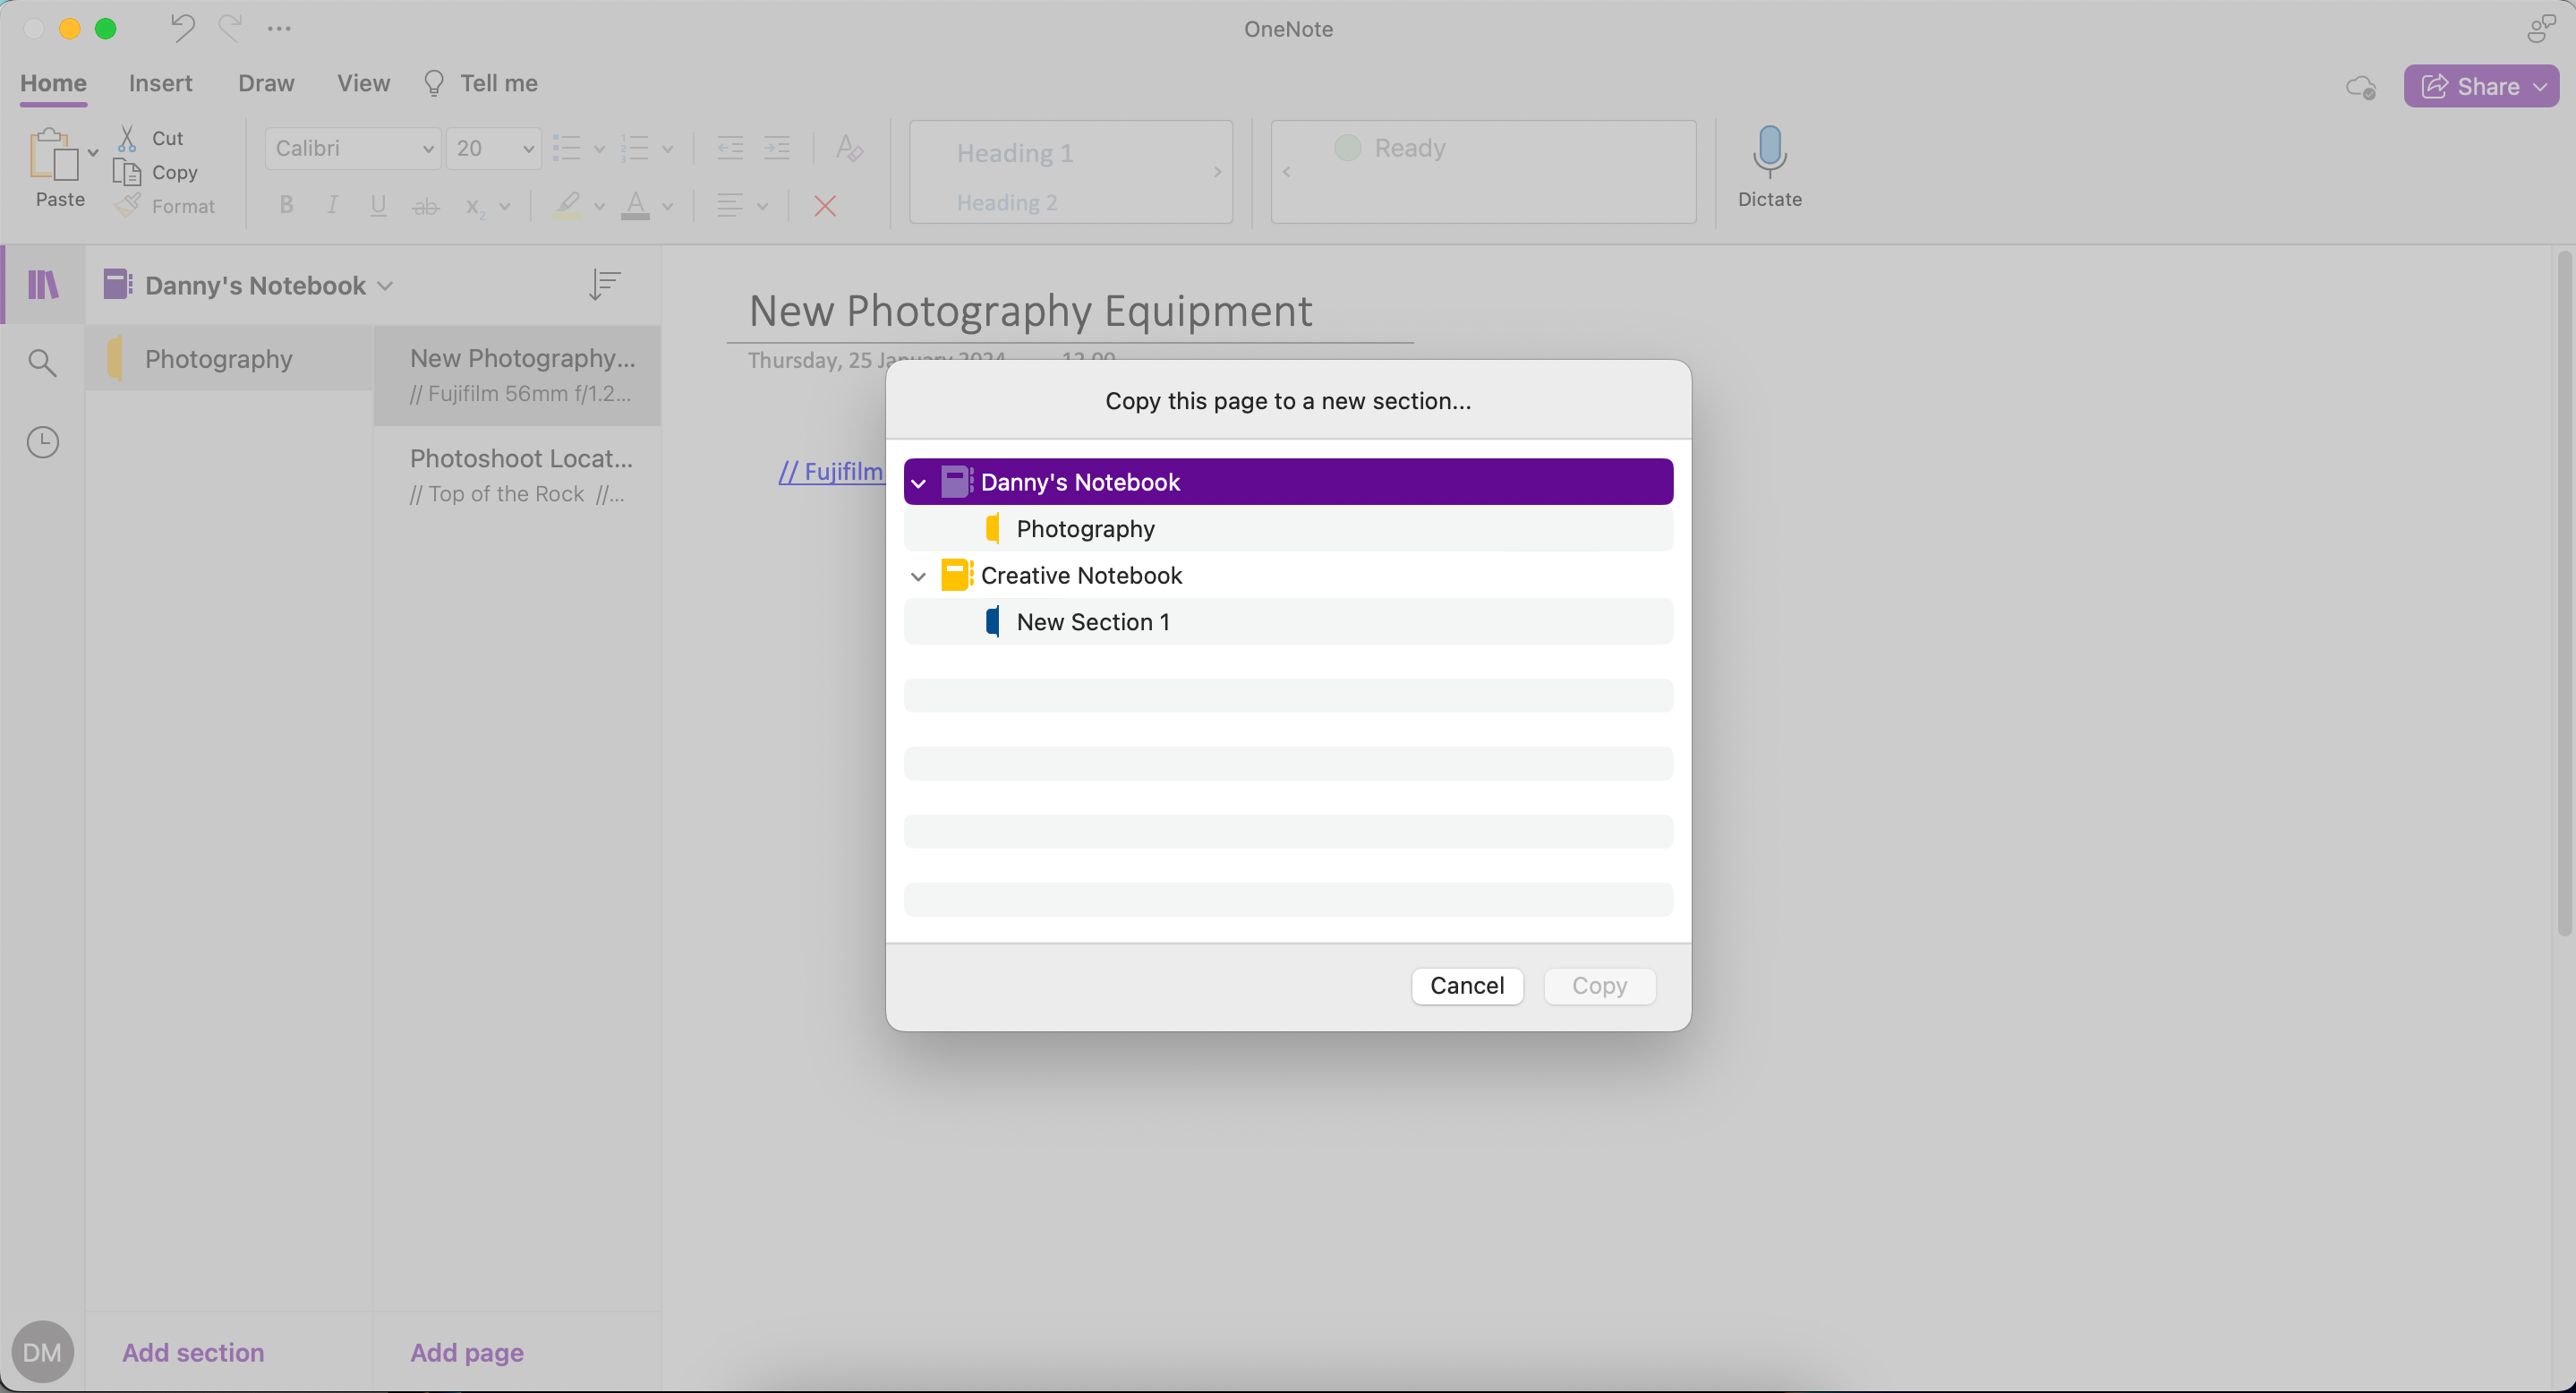 Choose a new notebook to share your pages to in OneNote